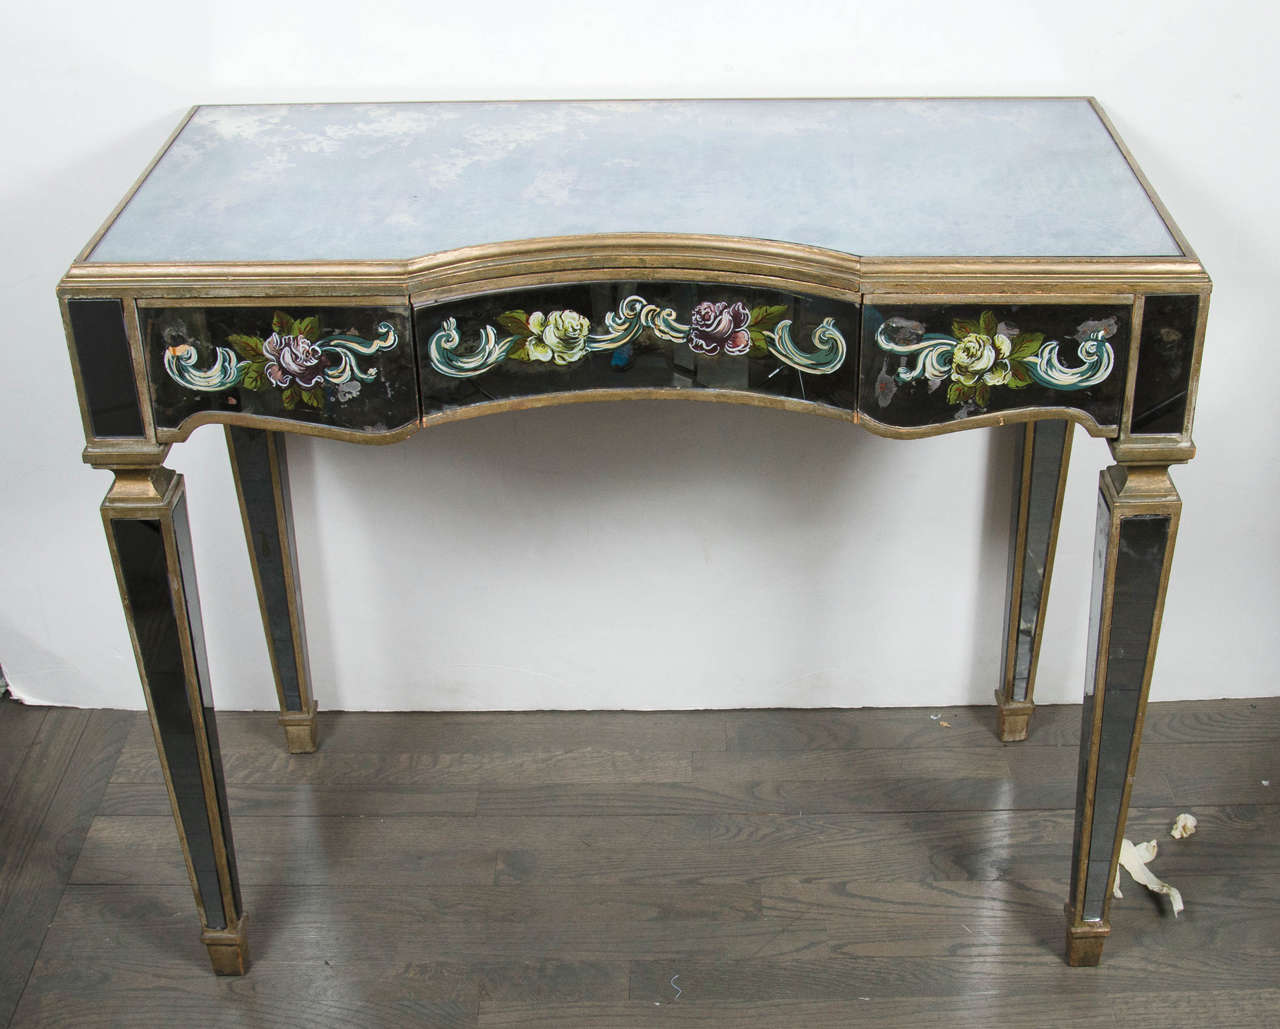 This lustrous 1940s Hollywood Regency console or vanity is elegant in it's design. It features smoked mirror, gilt detailing, as well as the beautiful hand-painted floral and scroll églomisé design, adding to its elegance. It is fitted with three